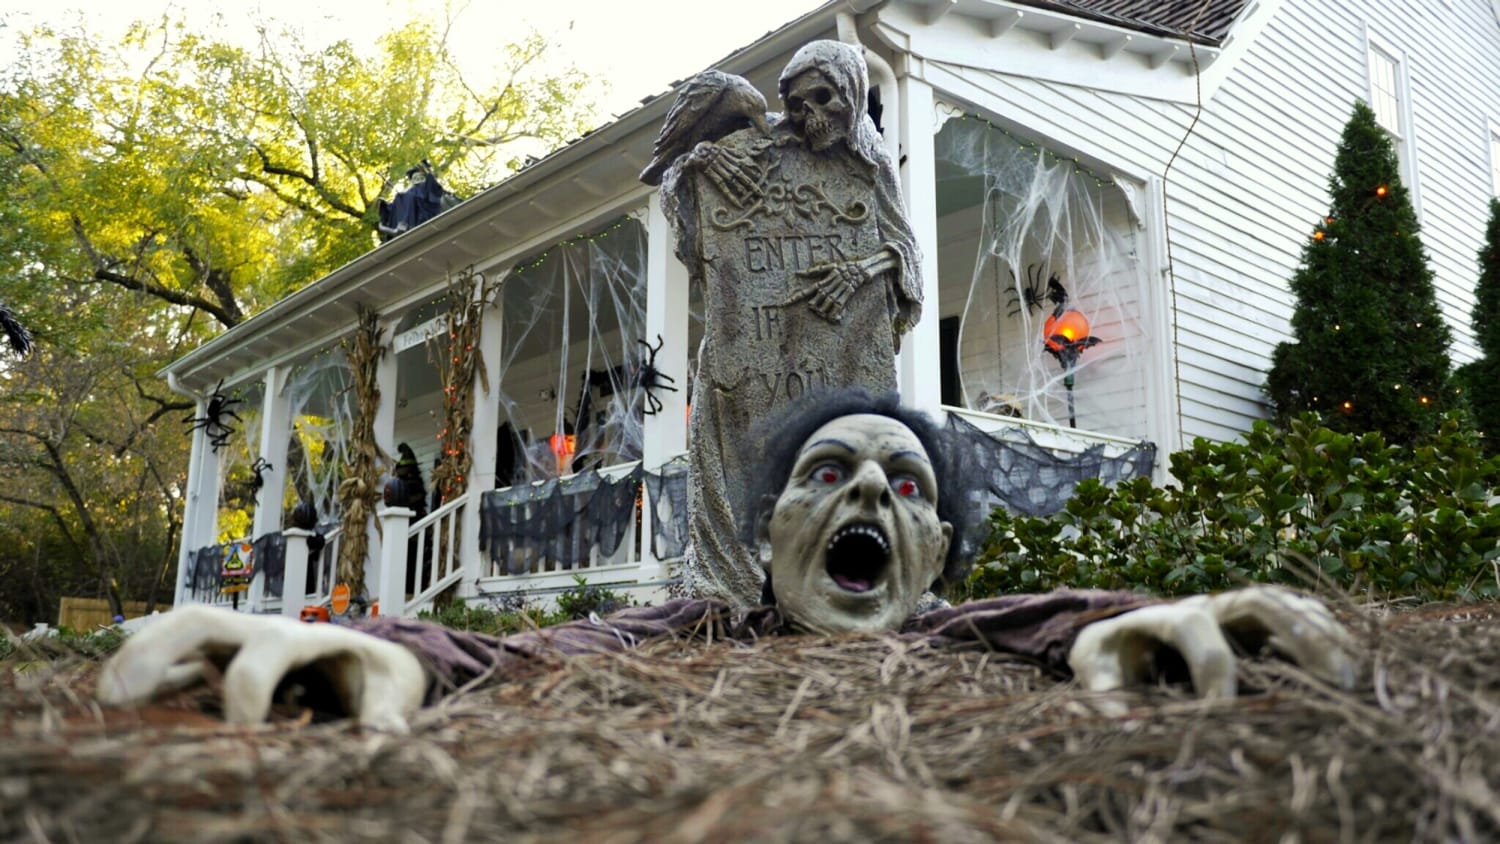 People Are Stealing Halloween Decorations. Here'S How To Respond